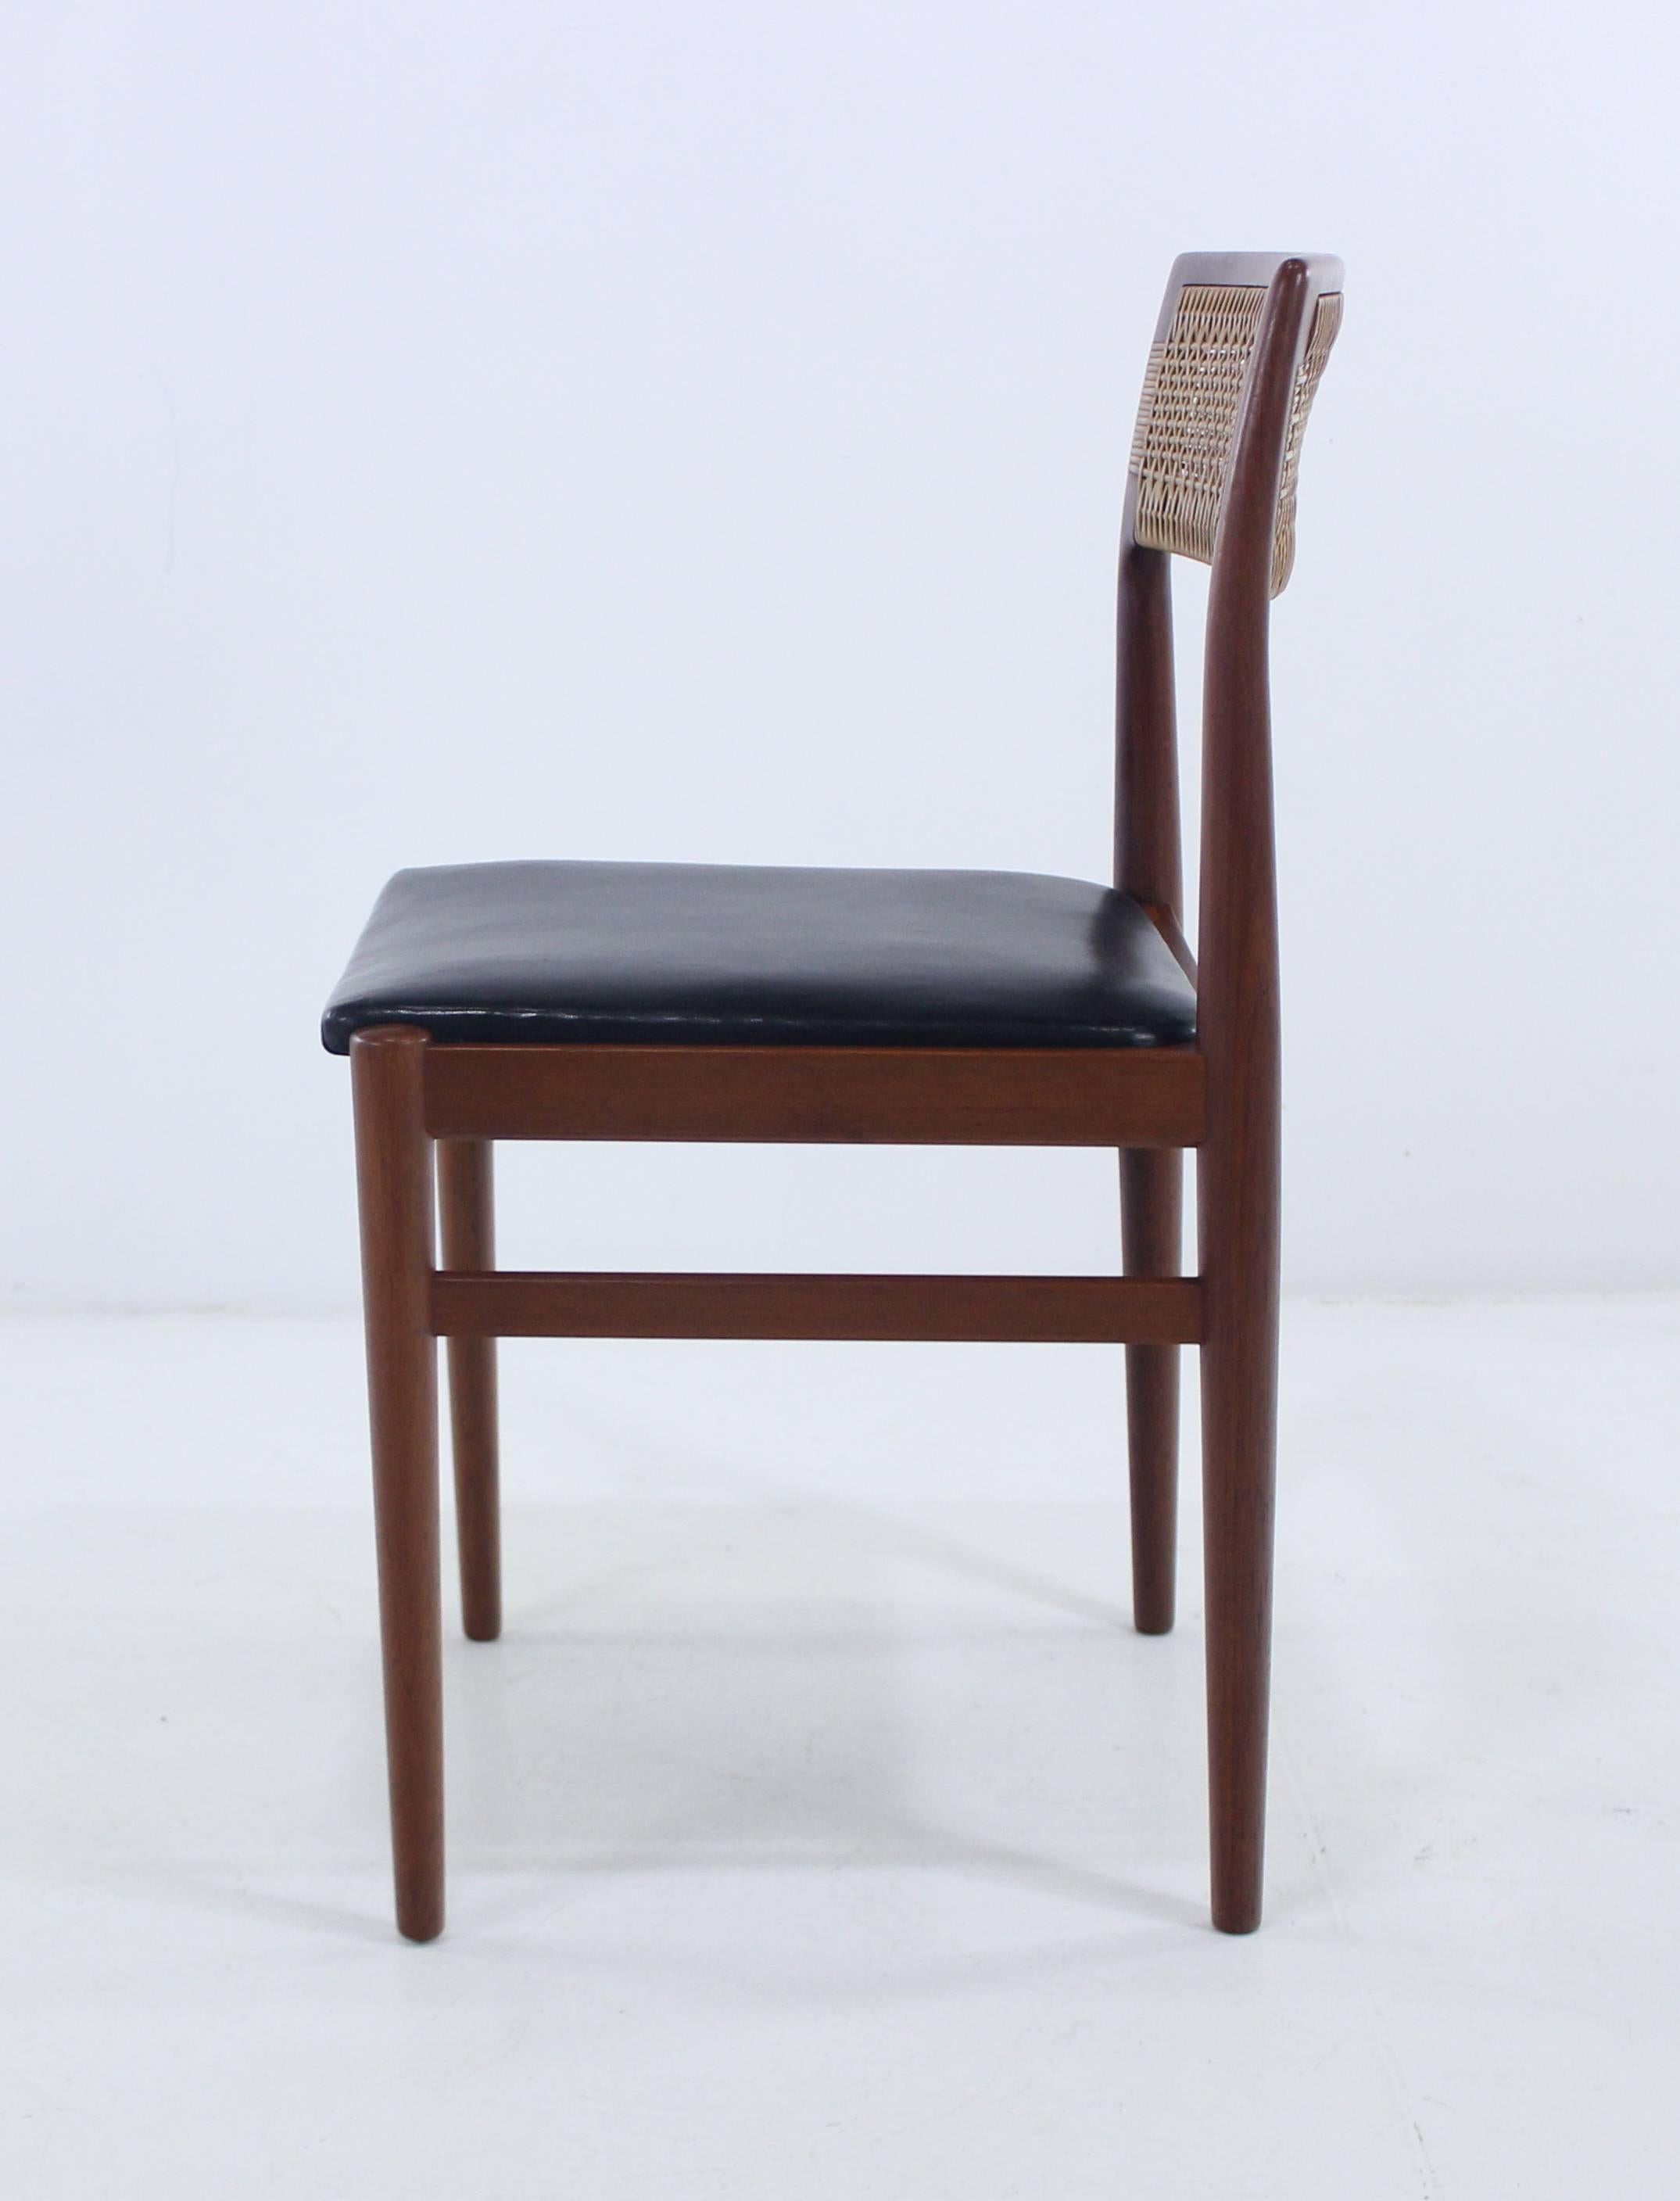 Set of Eight Distinctive Danish Modern Teak Dining Chairs Designed by Erik Worts In Excellent Condition For Sale In Portland, OR